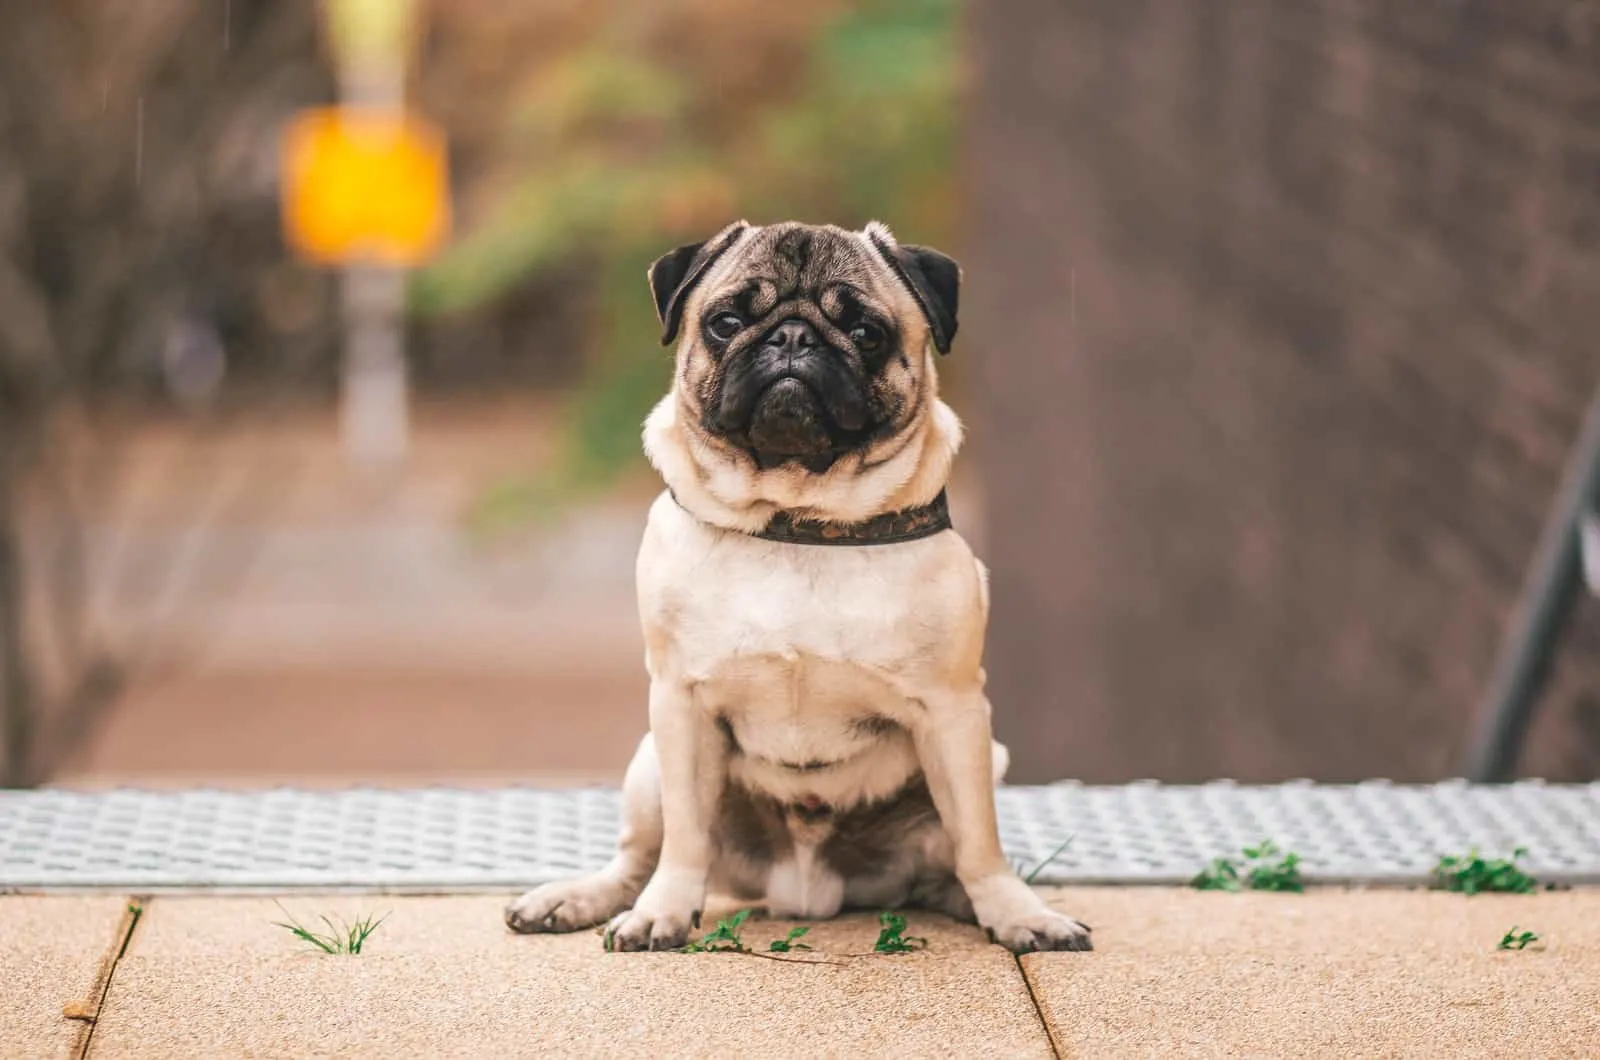 fawn pug photographed on the street